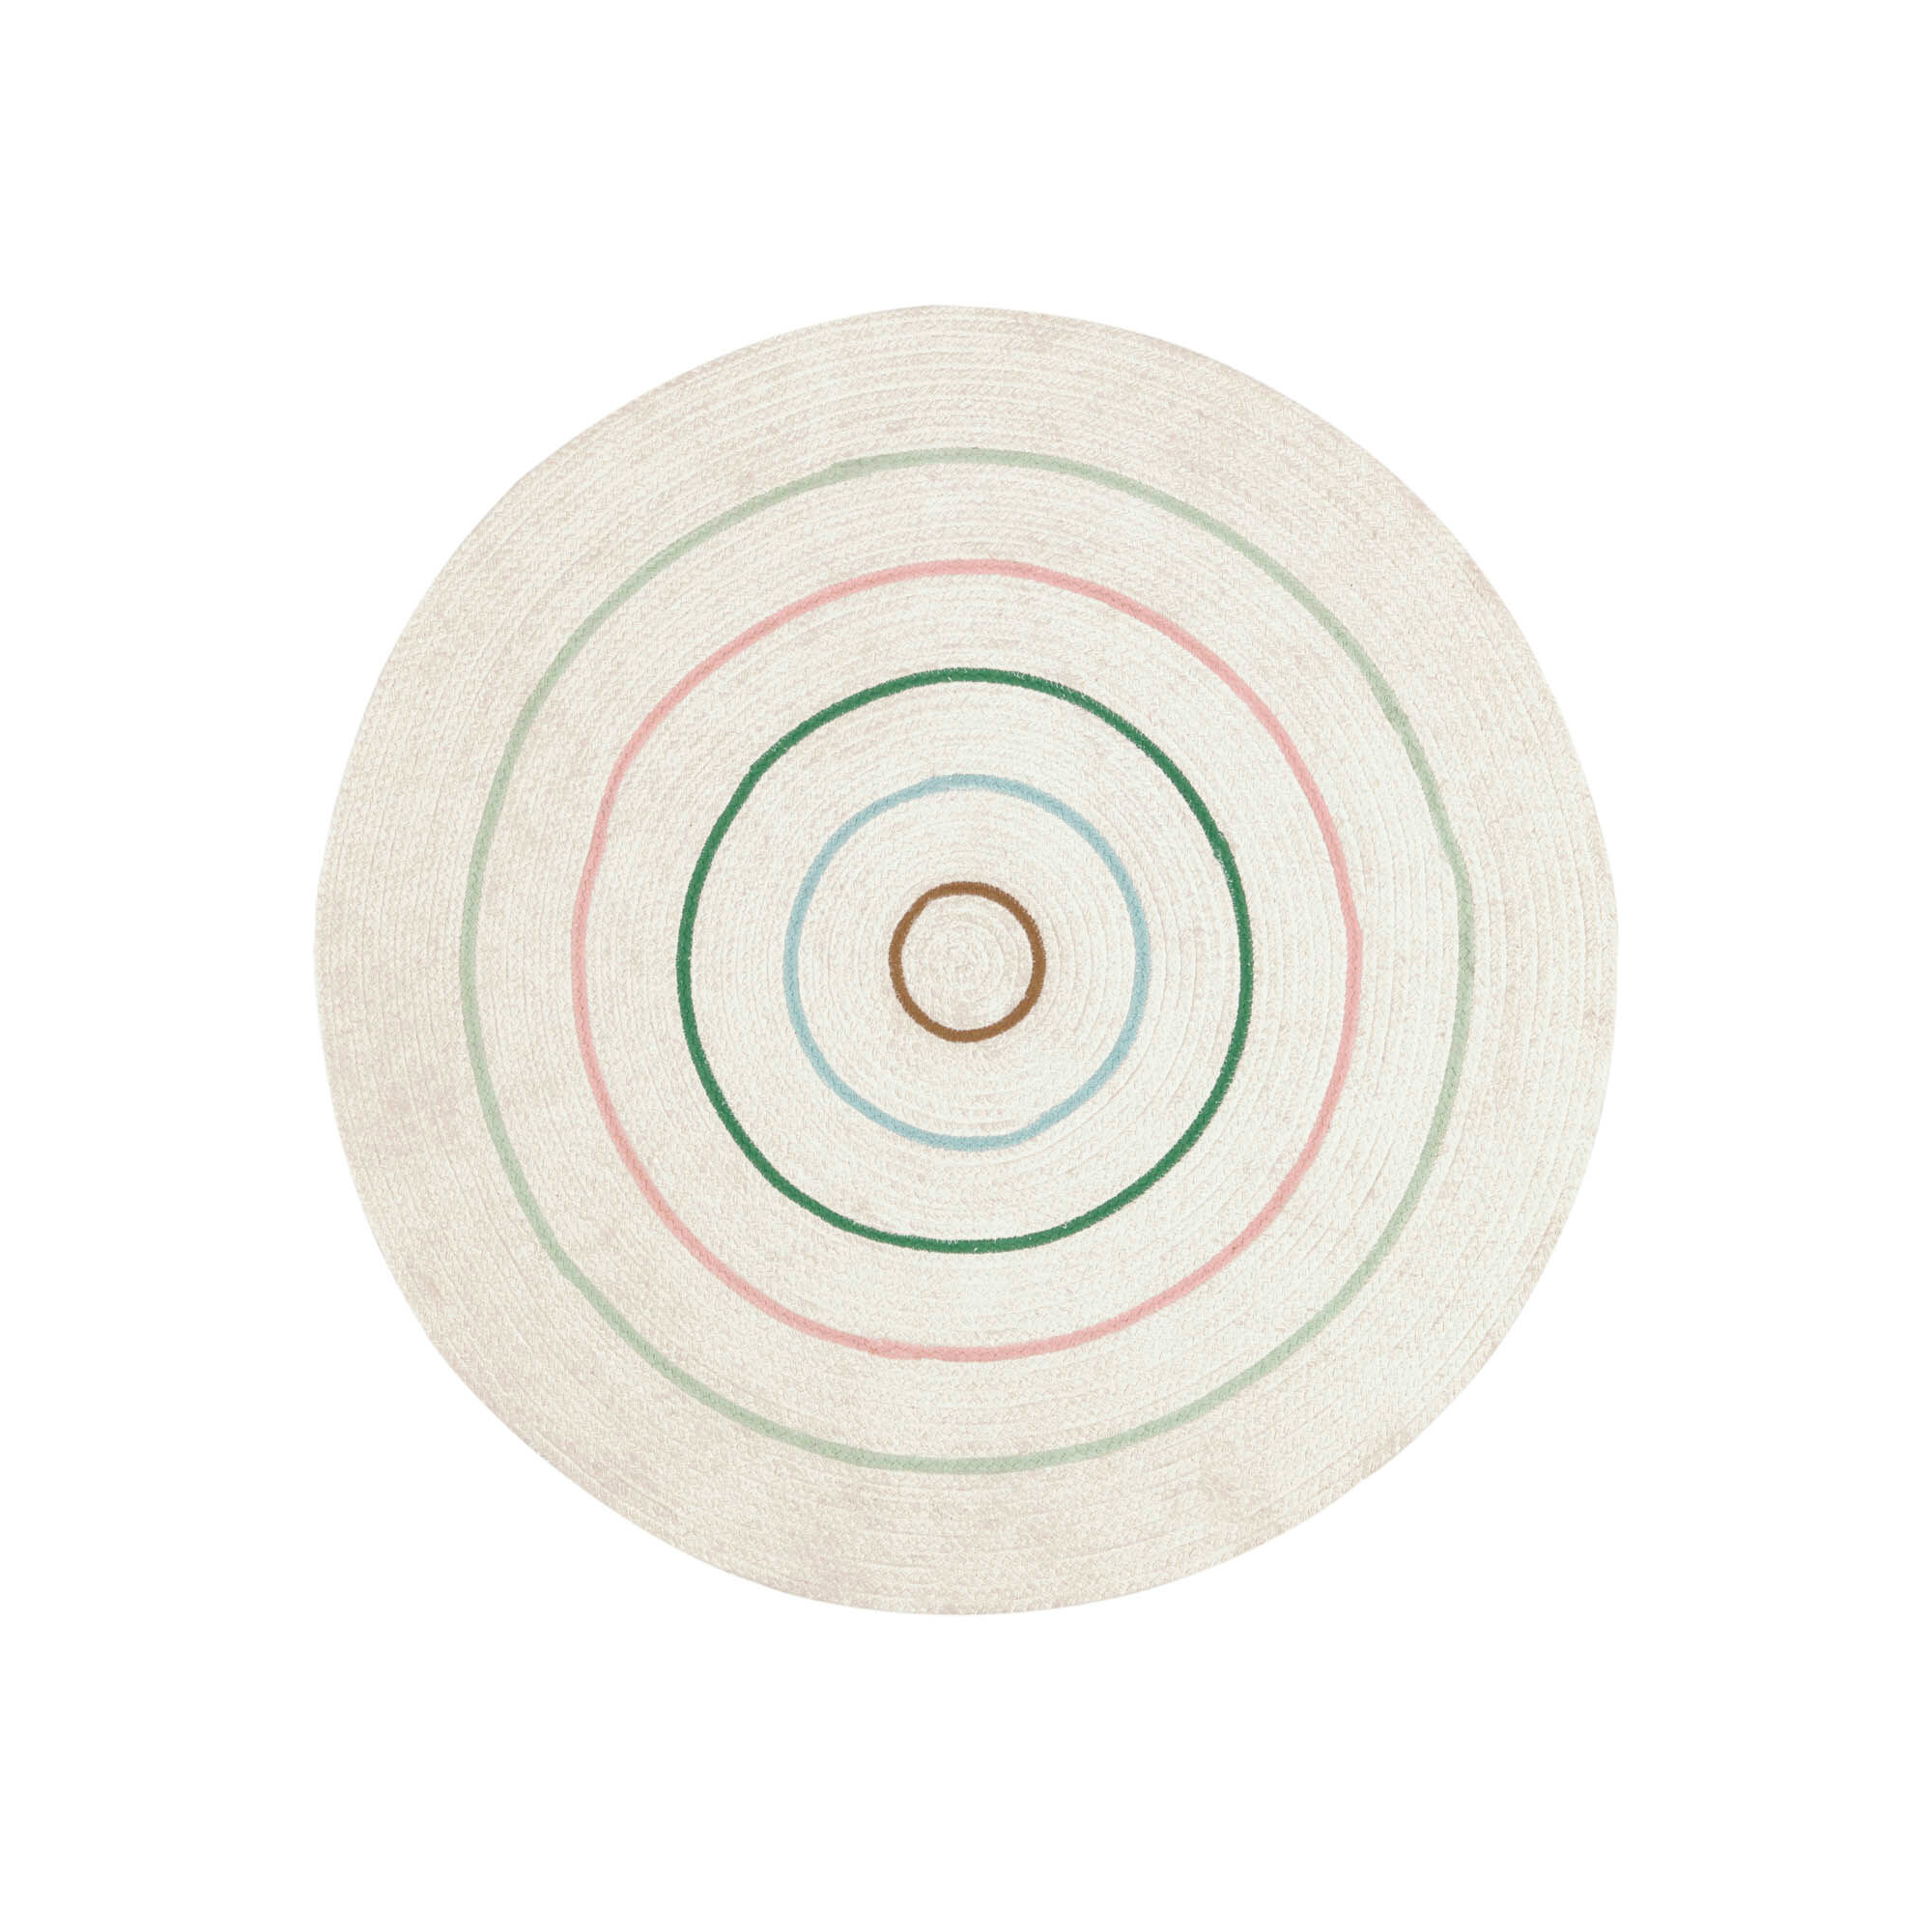 Kave Home Daiana round cotton rug, beige and multicolour Ø 120 cm